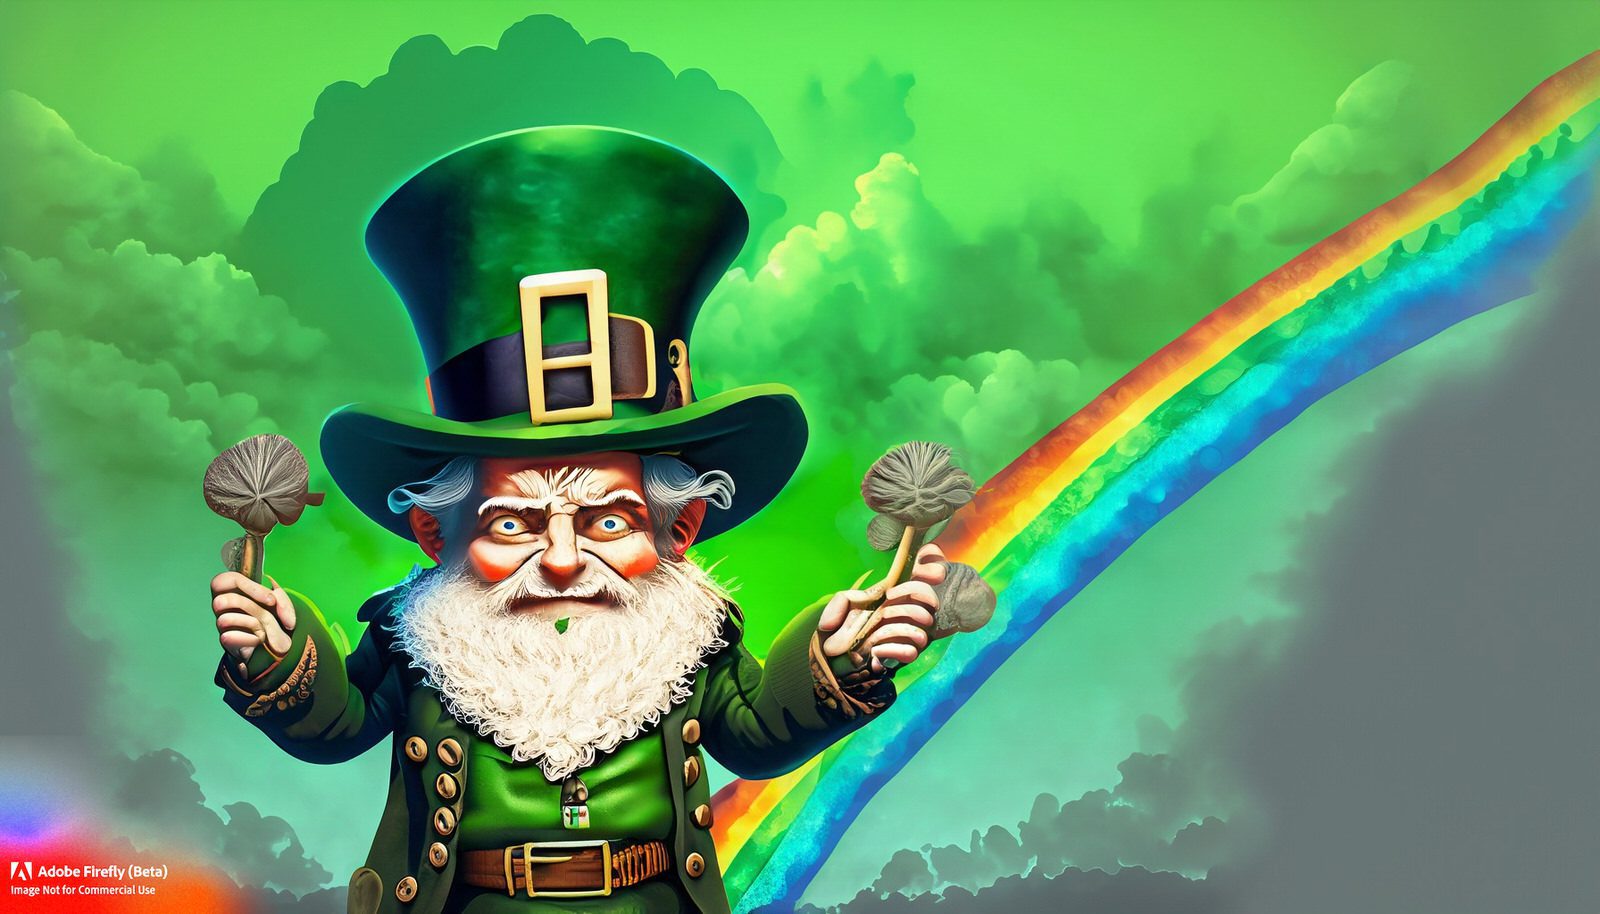 IF YOU ASK ADOBE FIREFLY TO GENERATE AN IMAGE OF A LEPRECHAUN THIS IS WHAT YOU GET 004